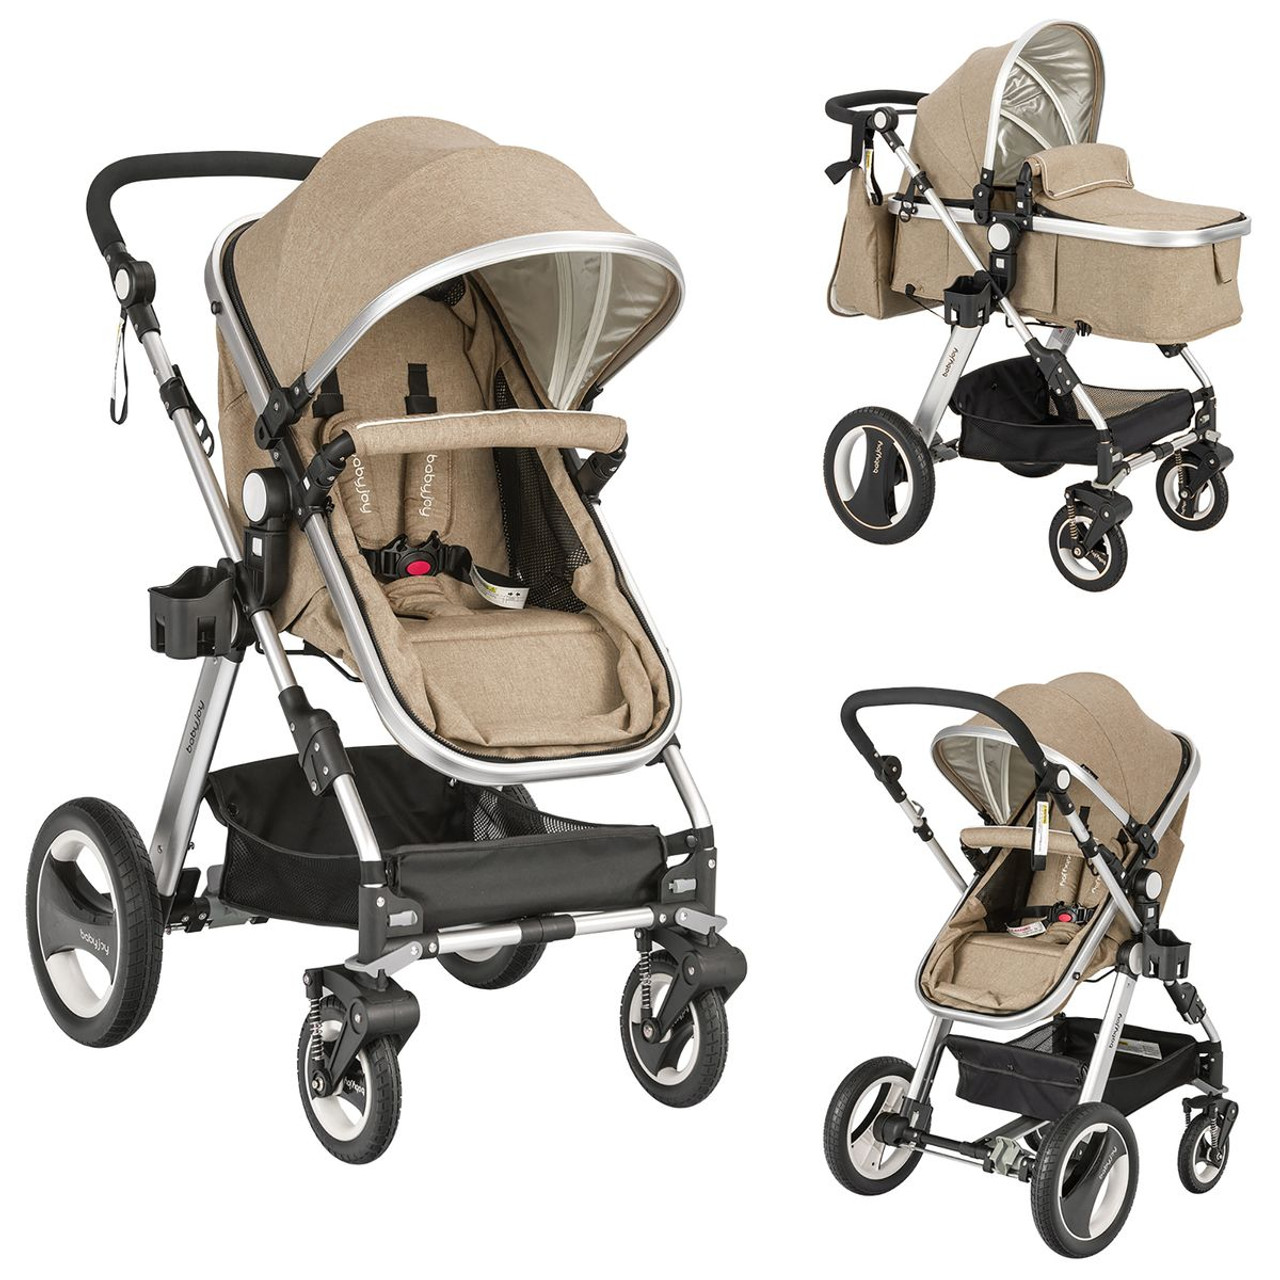 Folding Aluminum Baby Stroller Pram with Diaper Bag by Babyjoy™ product image